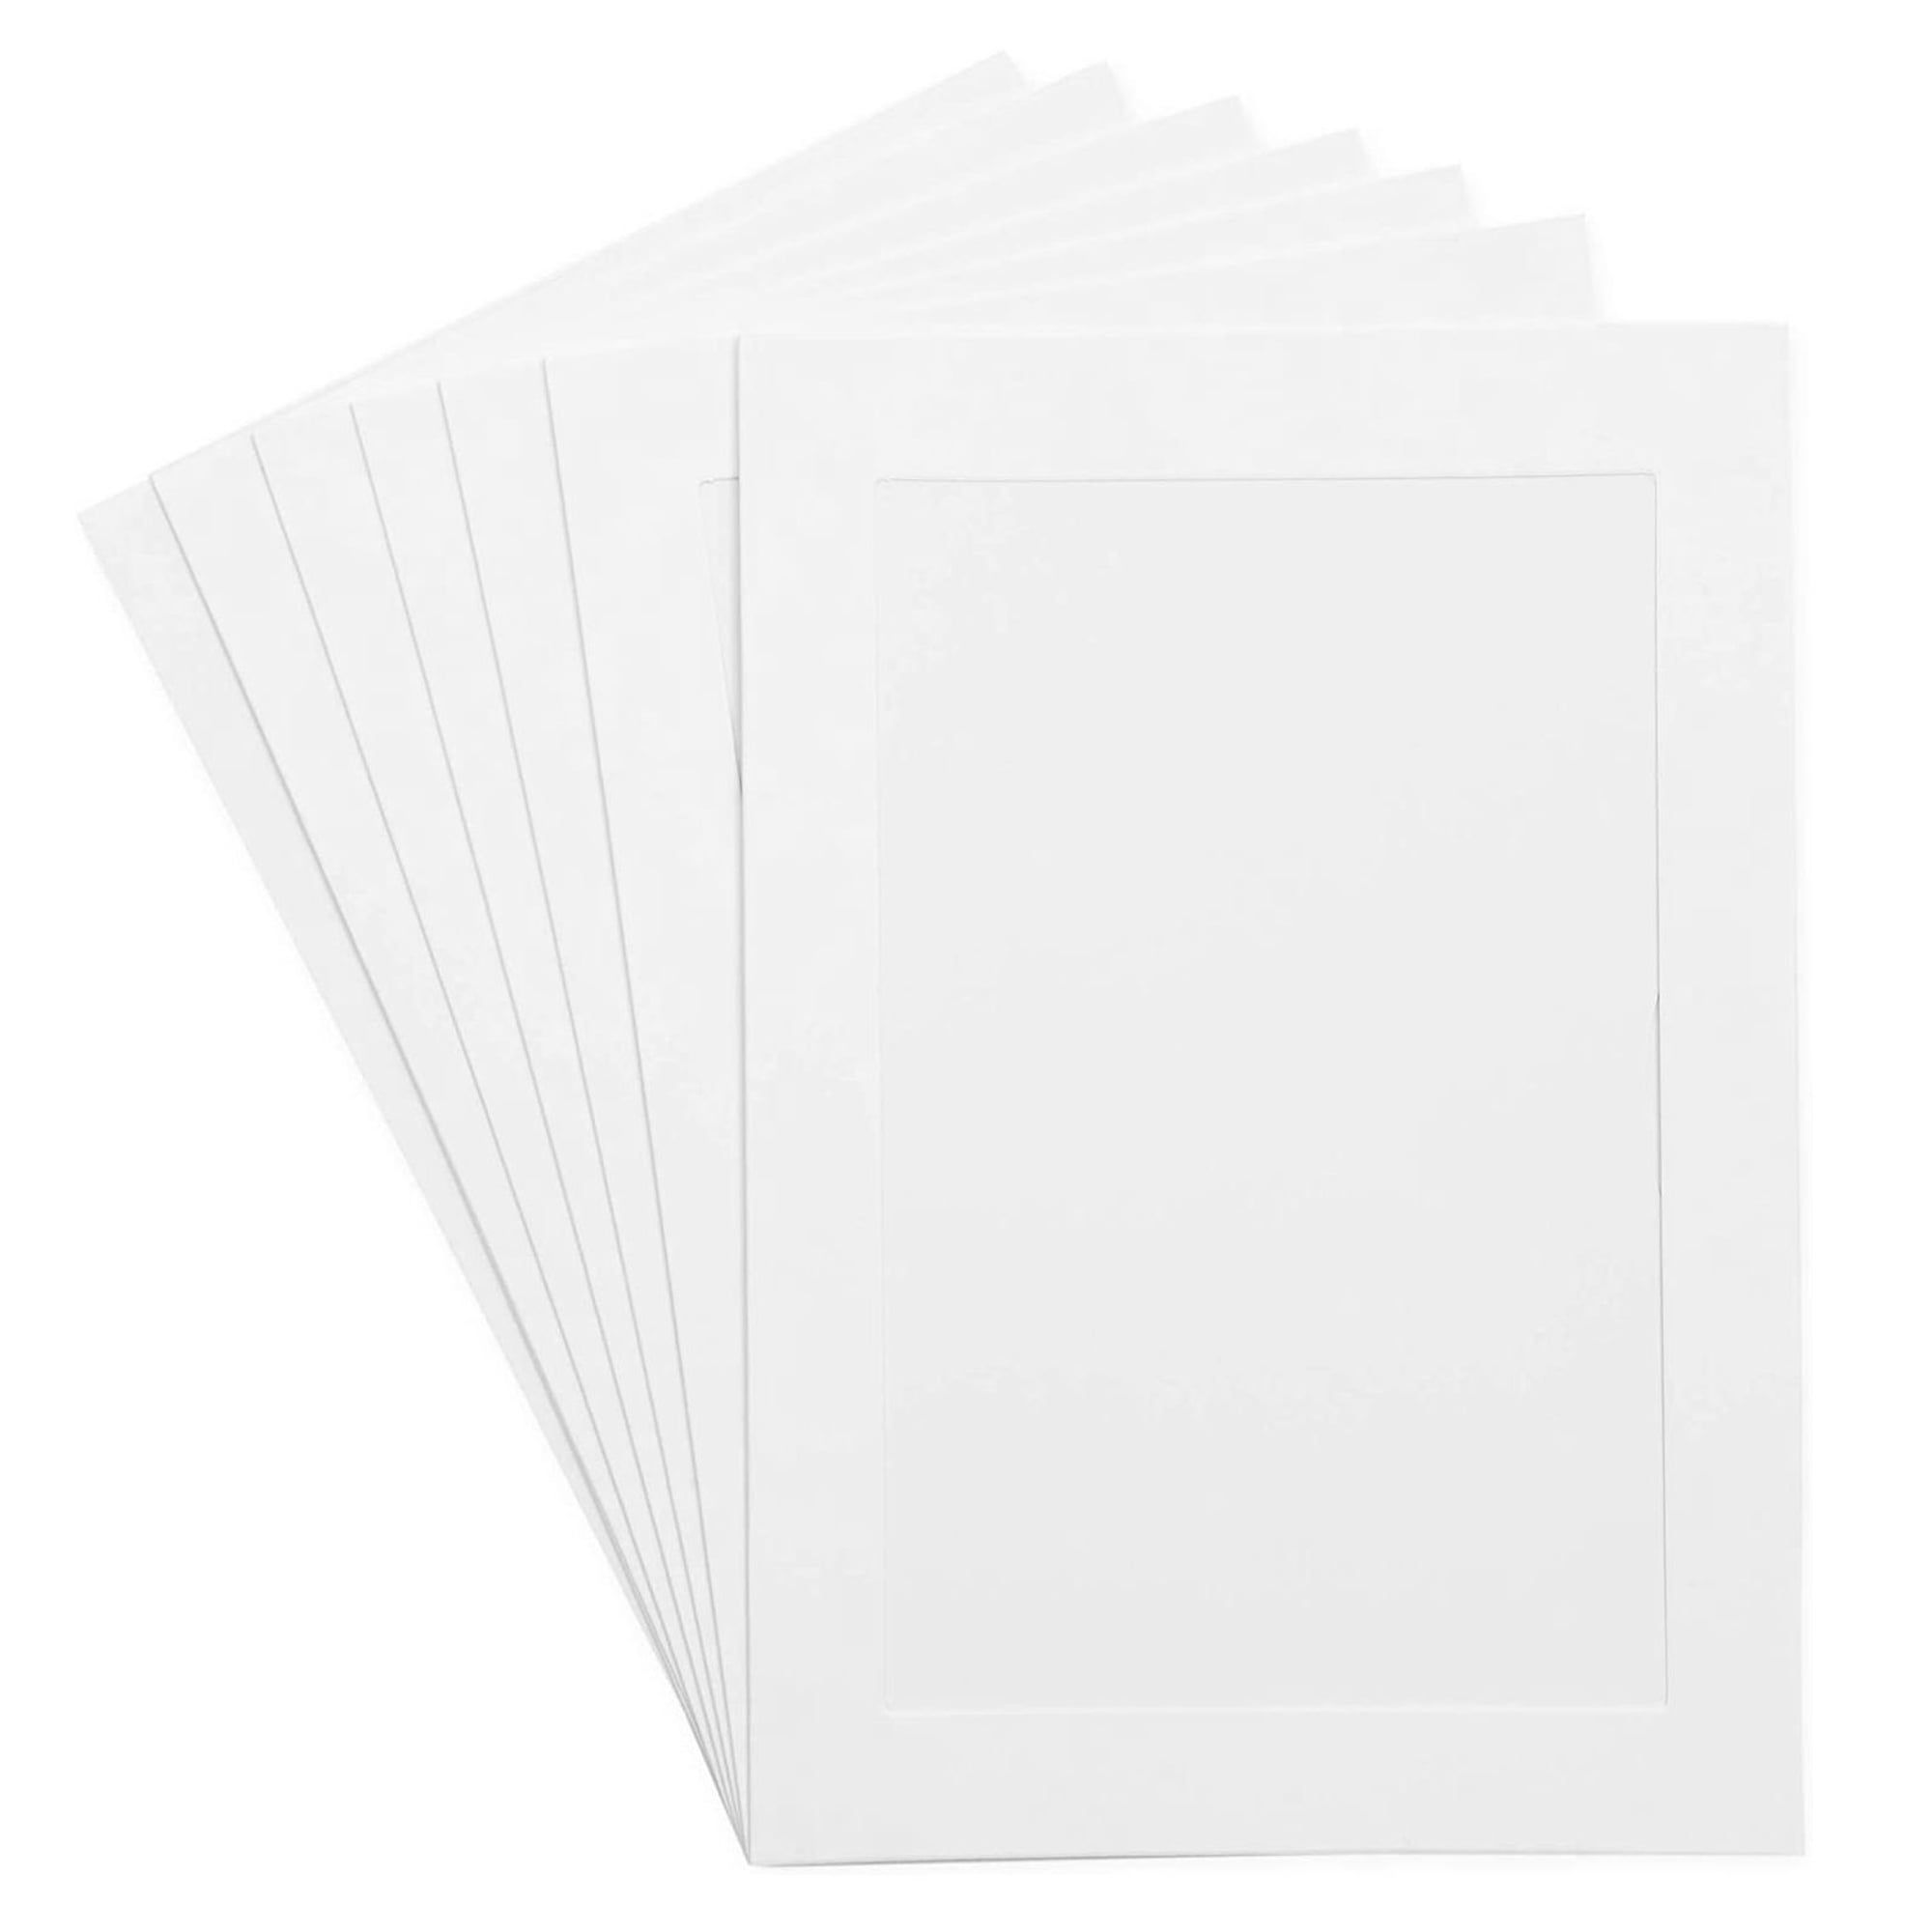 Ctosree 500 Set Photo Frame Cards with Envelopes 4 x 6 Paper Picture Frames  Cardboard Photo Folders Greetings Holder Insert Invitation Cards for